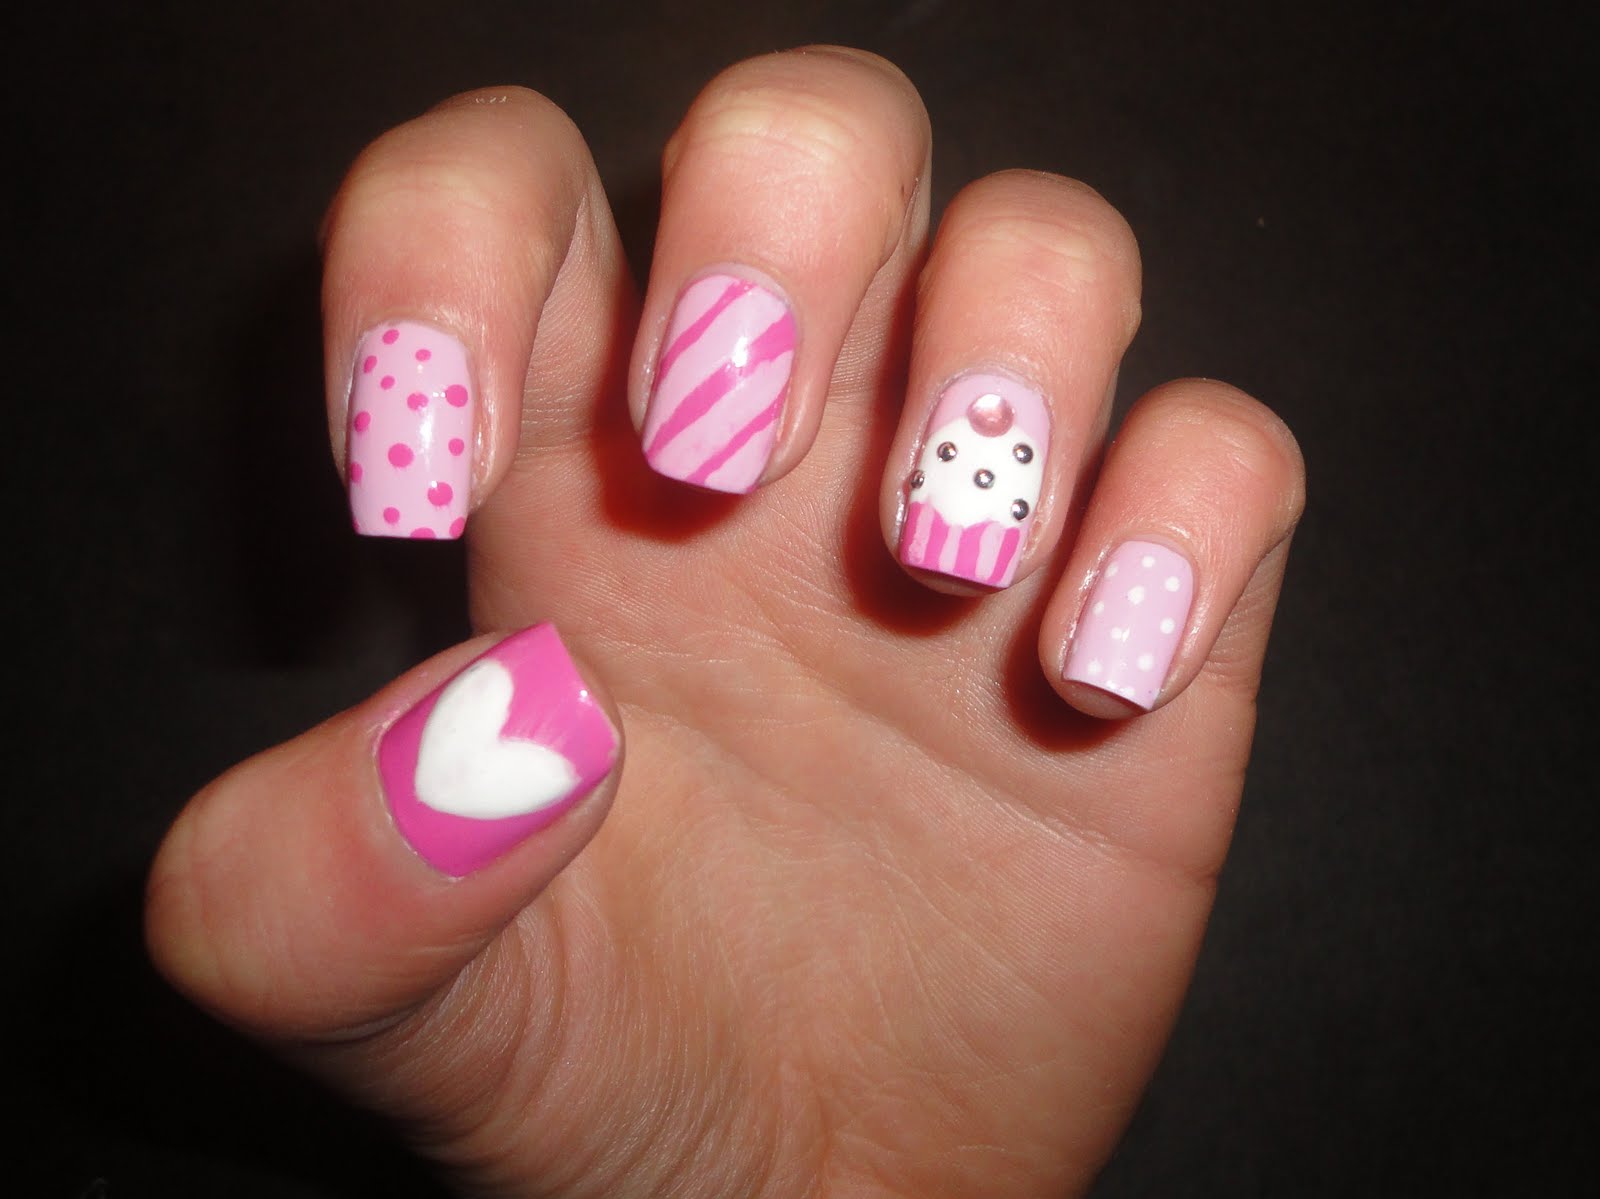 2. 20 Really Cute Nail Designs You Will Love - wide 4